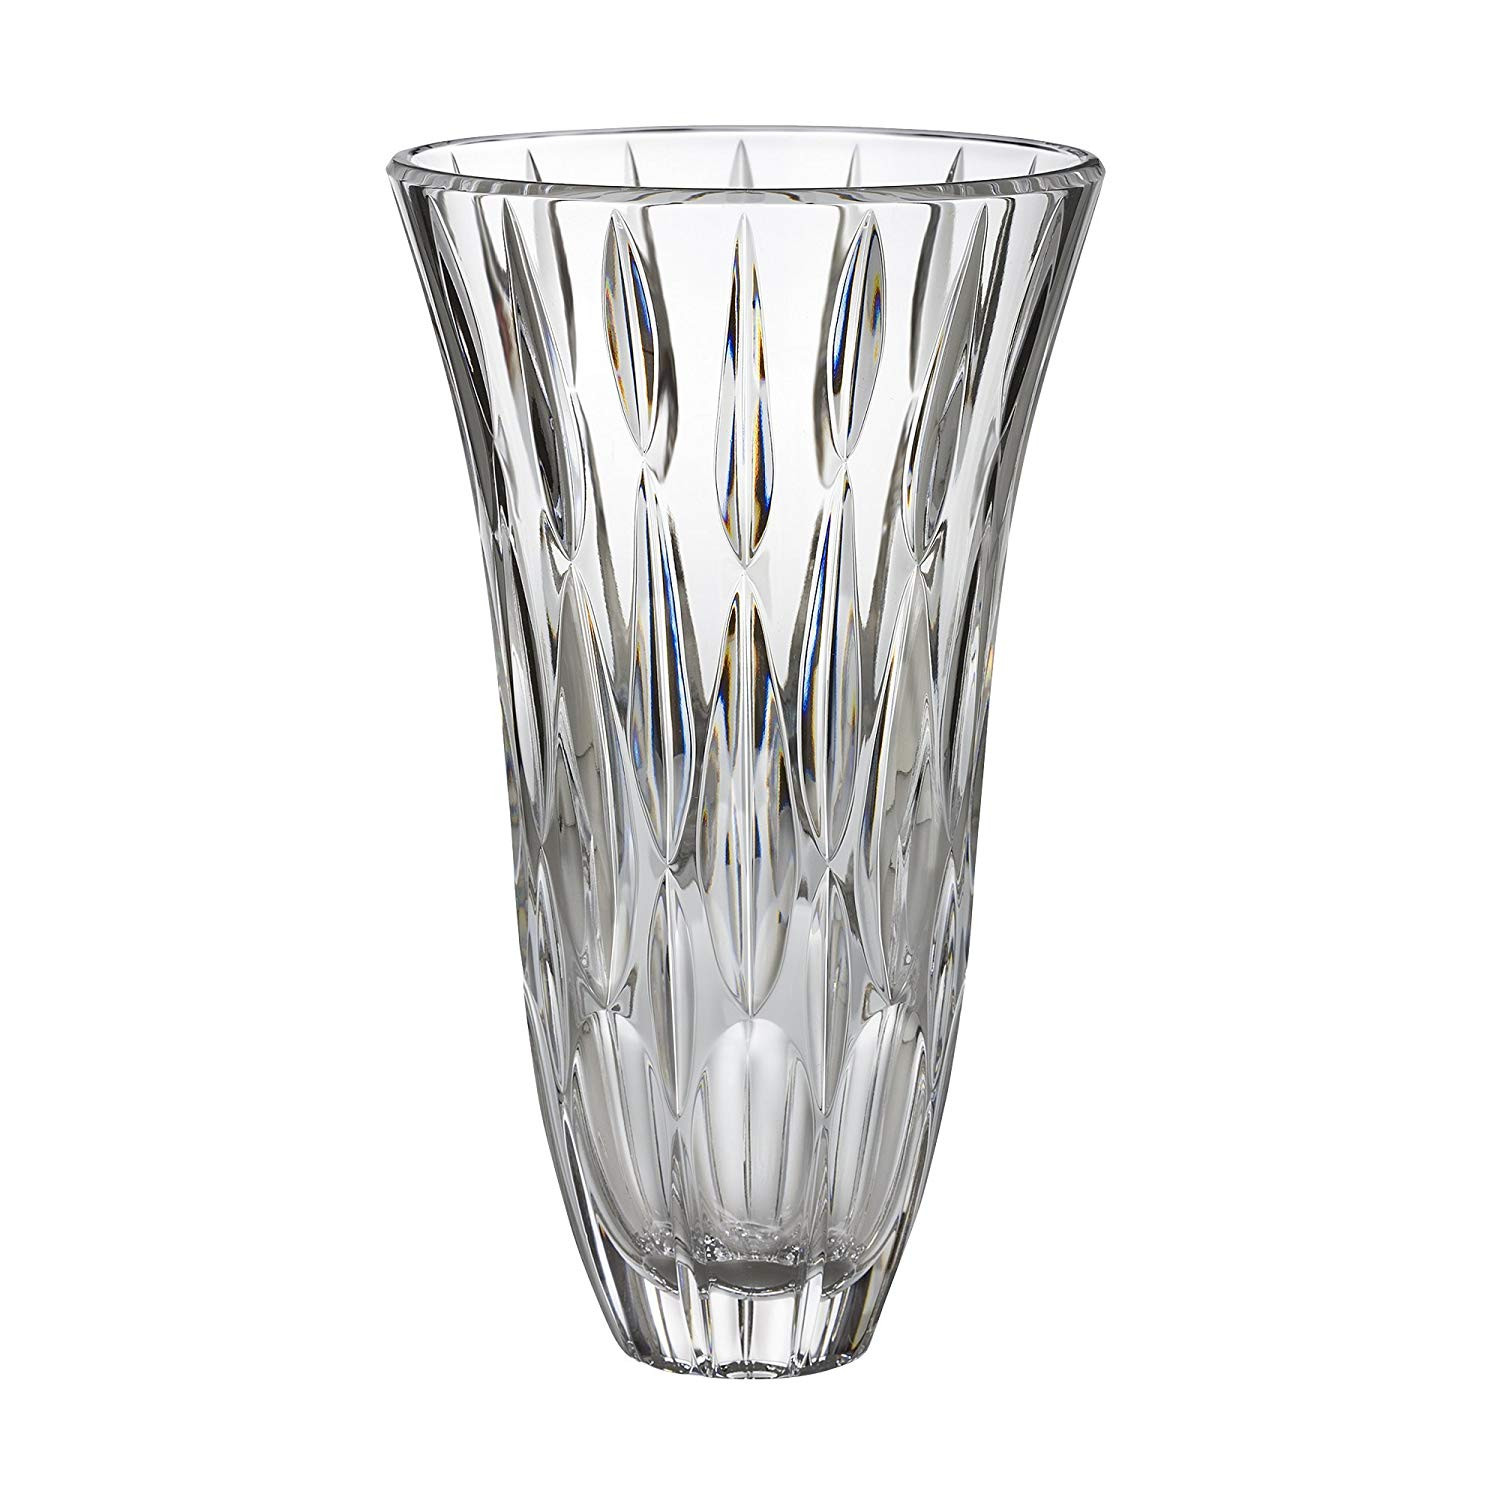 21 Ideal Mikasa Blossom Crystal Vase 2024 free download mikasa blossom crystal vase of amazon com marquis by waterford rainfall 11 vase large home within amazon com marquis by waterford rainfall 11 vase large home kitchen